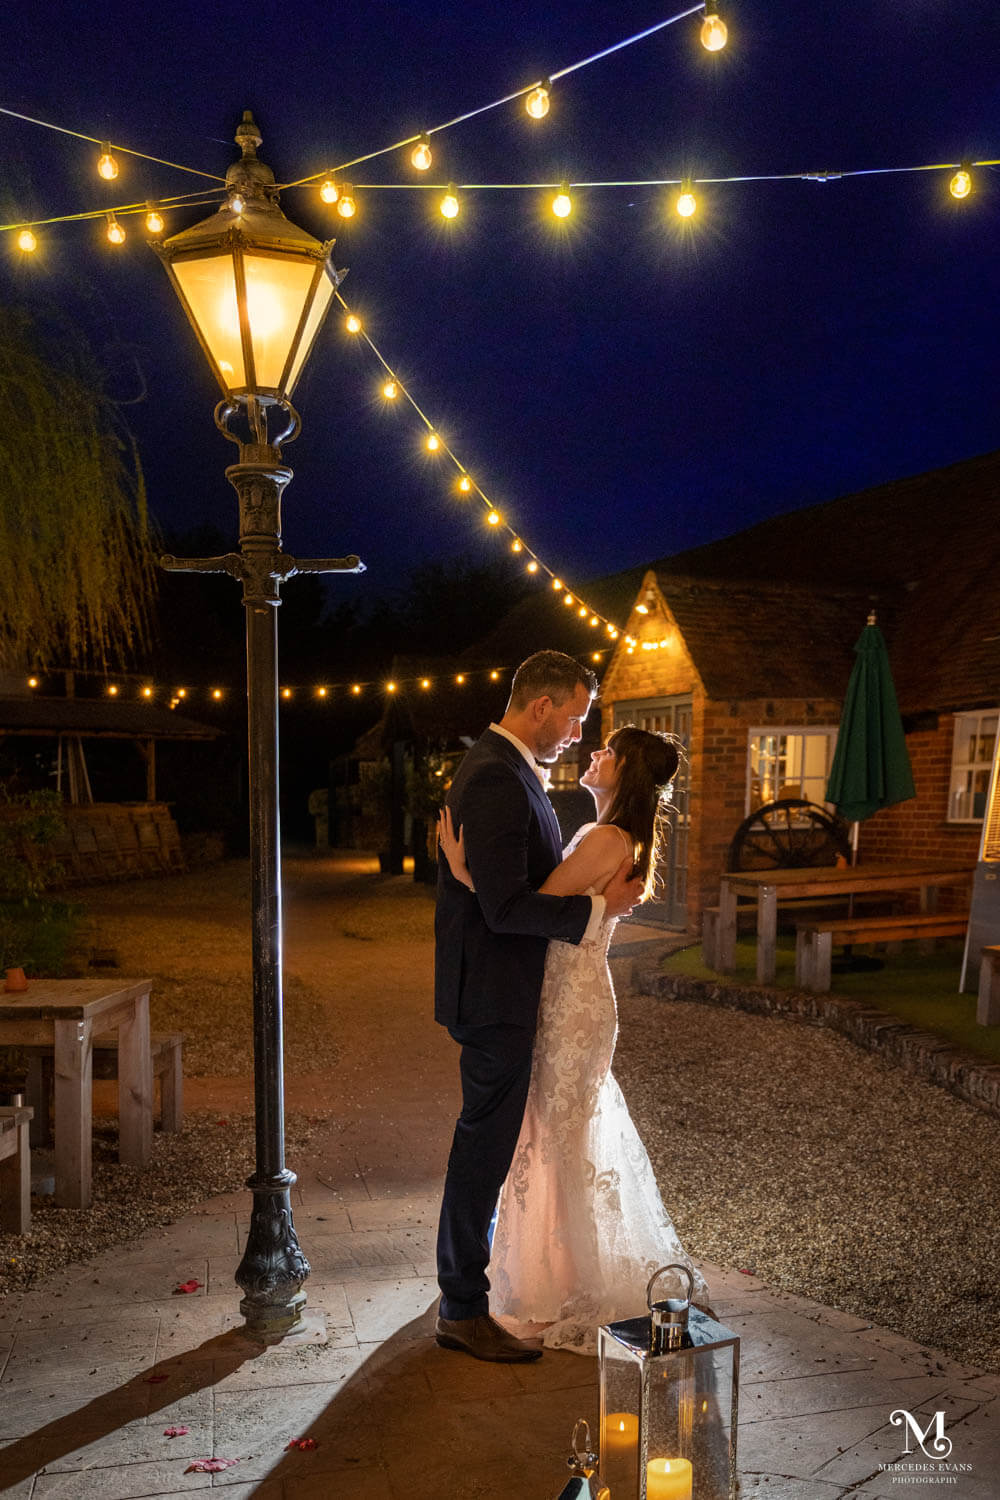 the bride and groom embrace under the lamp stand and festoon lights in the courtyard at Cantley House hotel